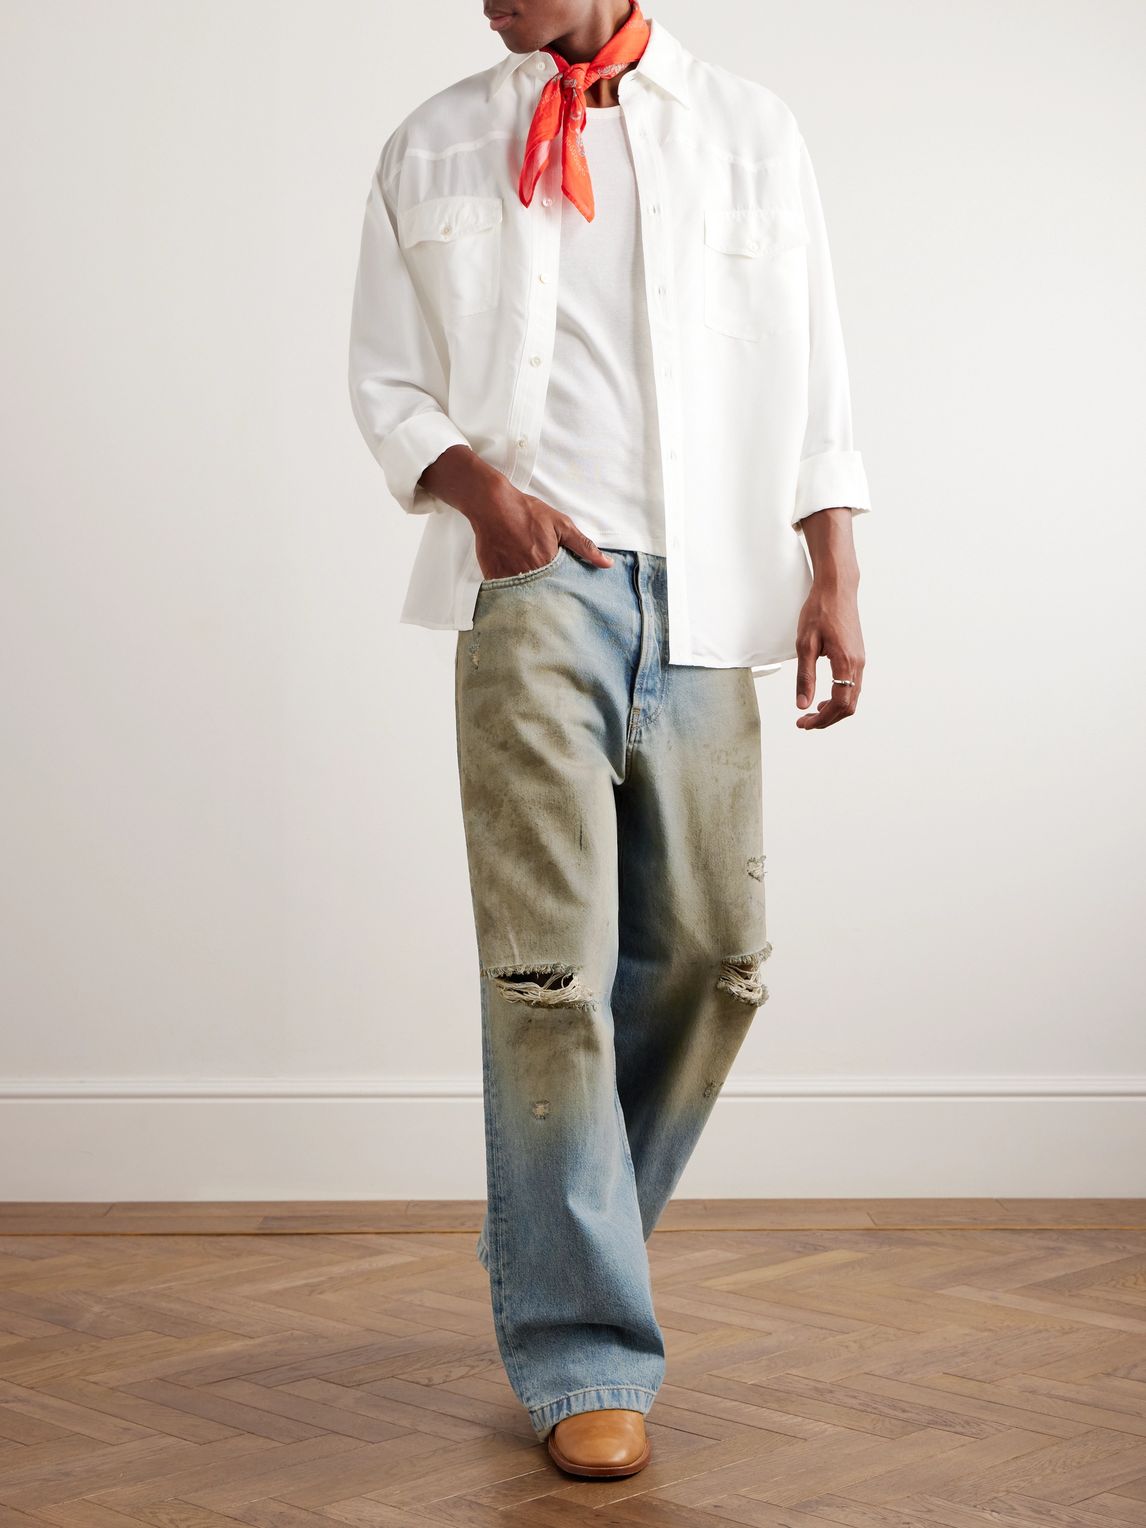 acne studious 1989 loose fit jeans 28×30 - デニム/ジーンズ